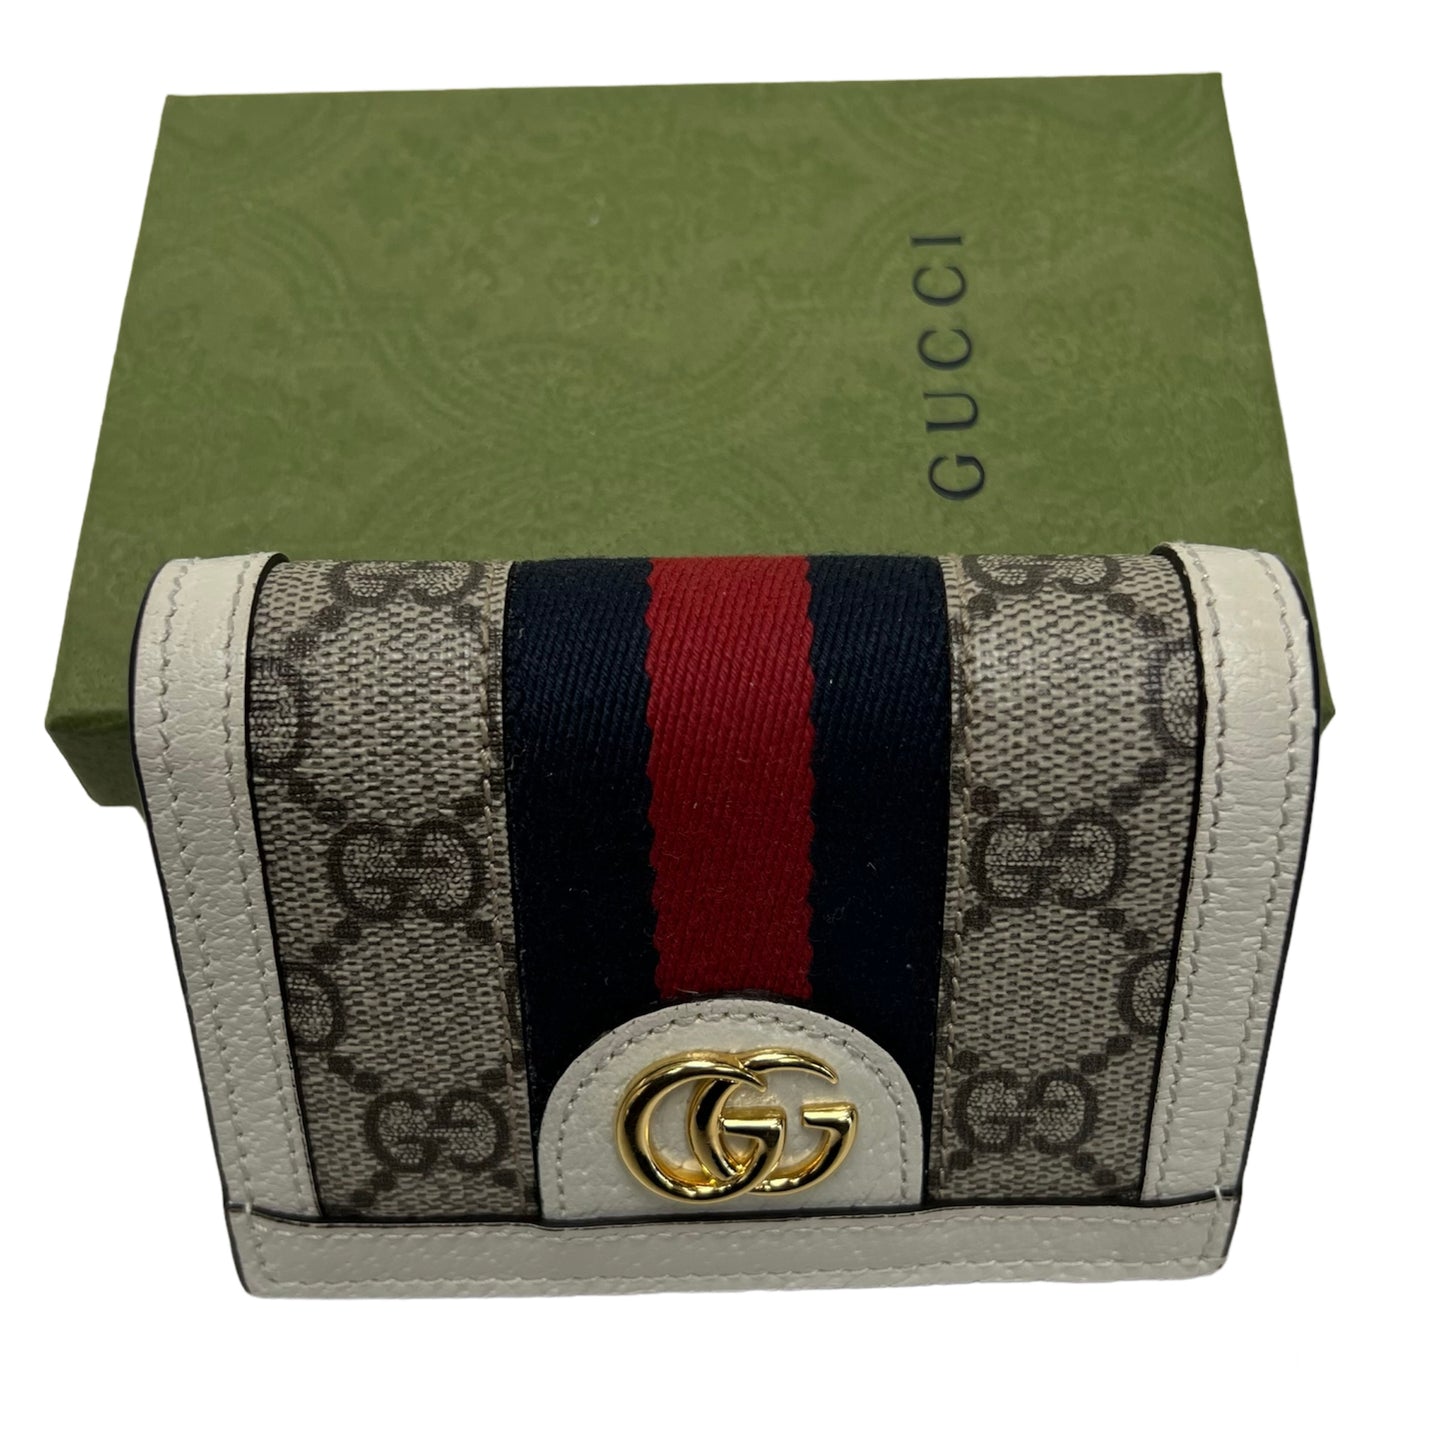 Gucci Ophidia Card Case Wallet with Box